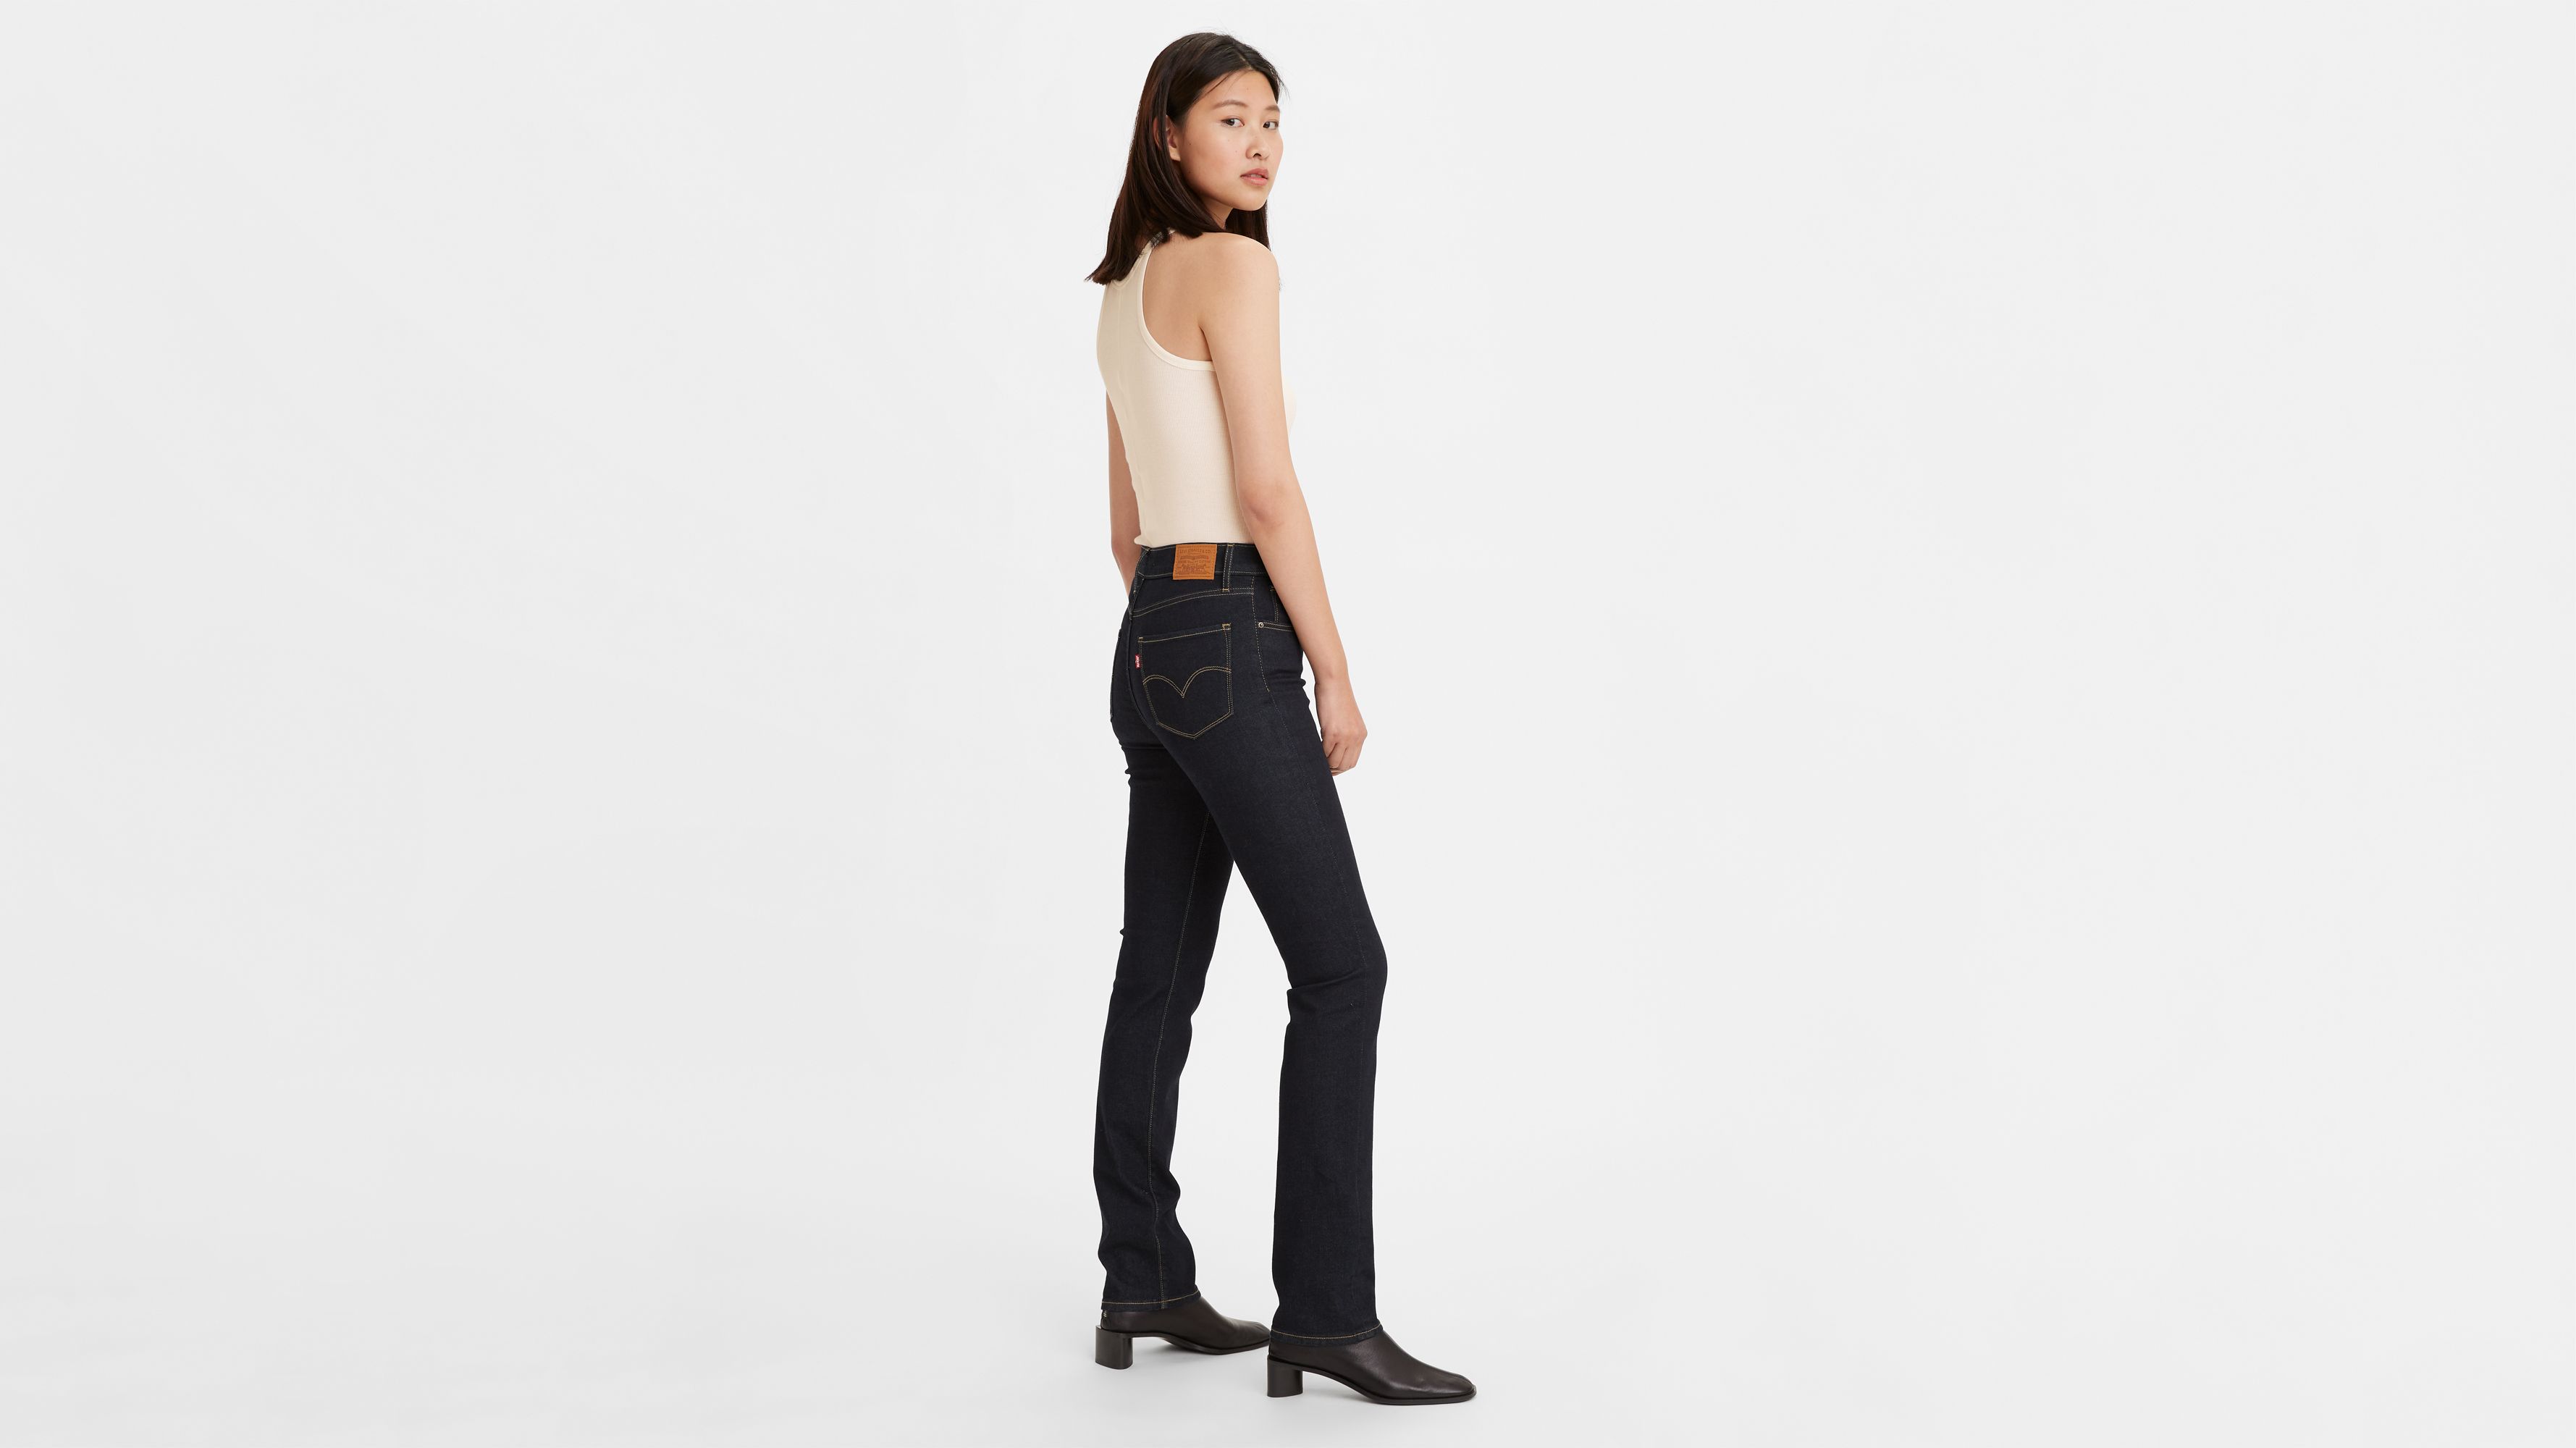 levi's 724 high rise jeans